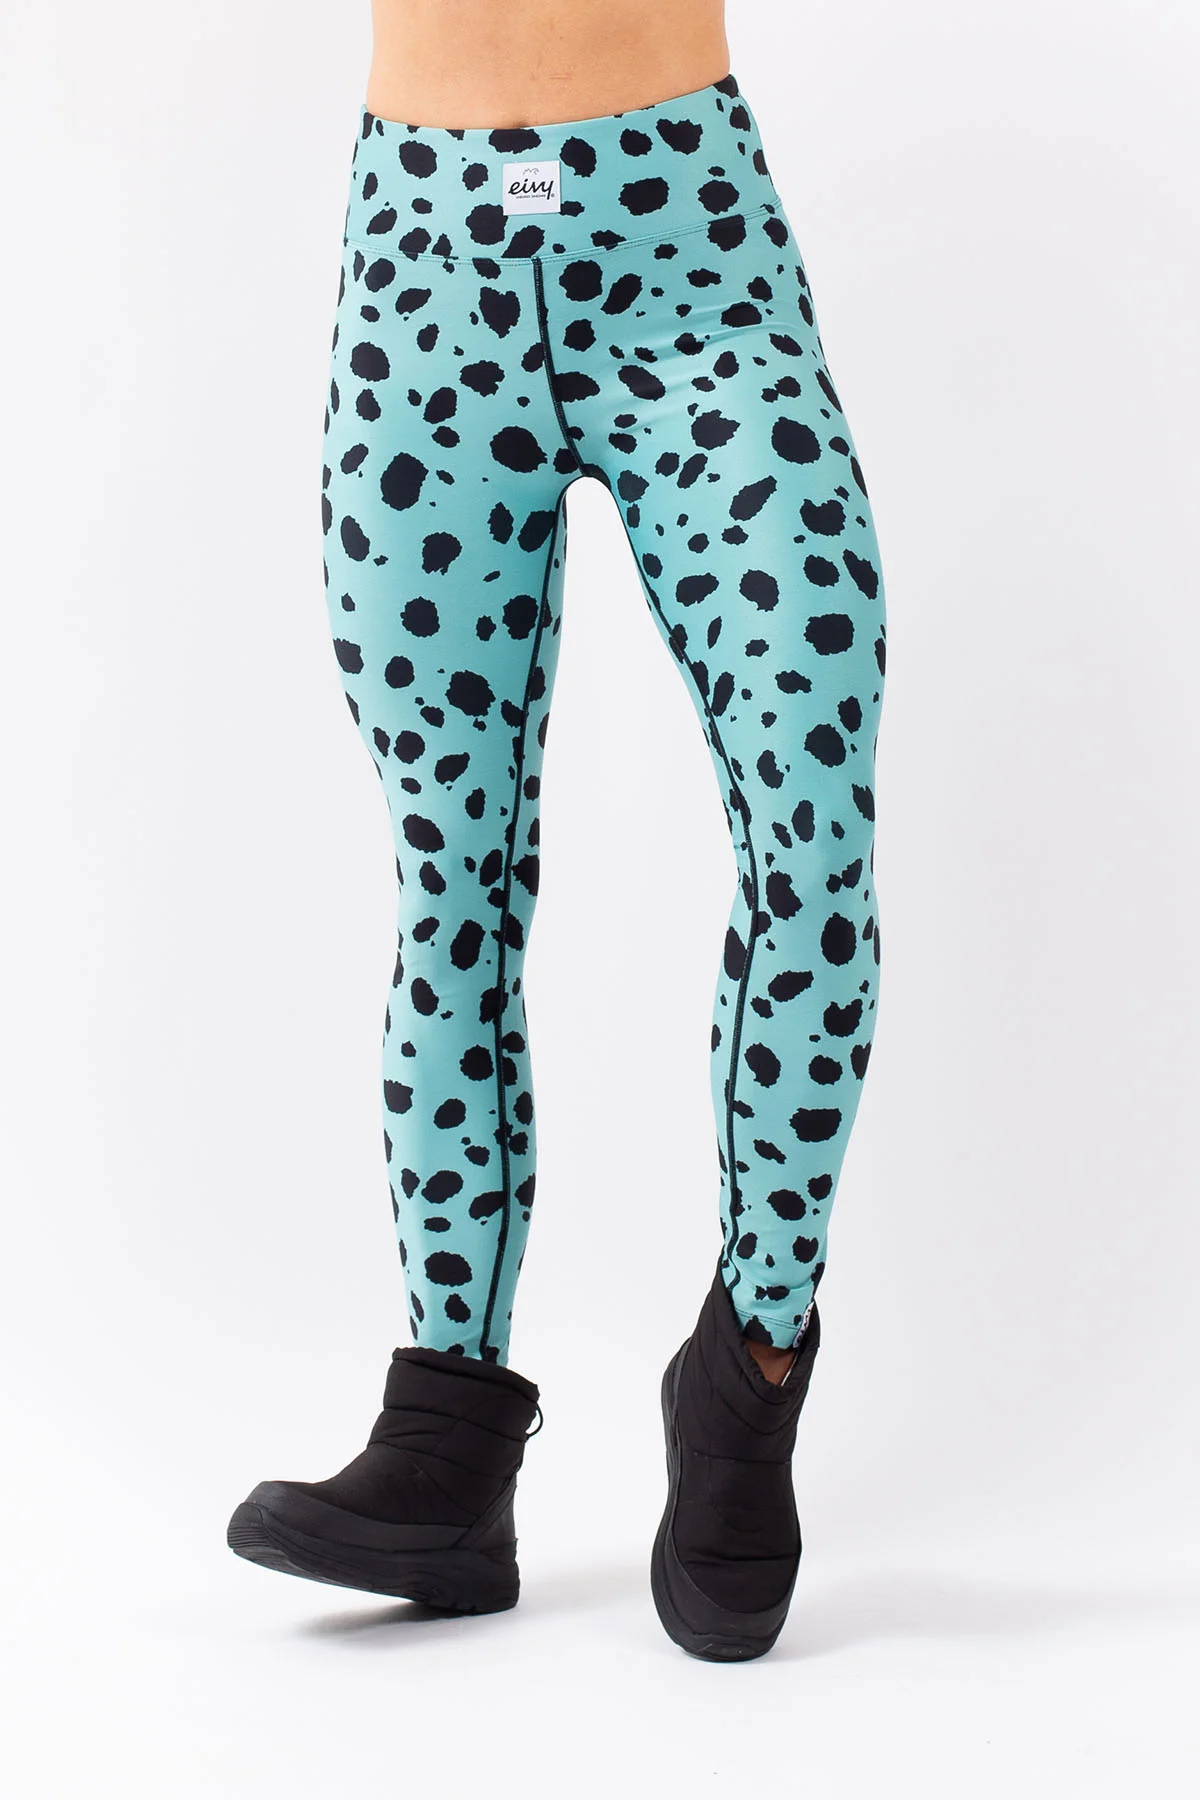 Icecold Tights - Turquoise Cheetah | M